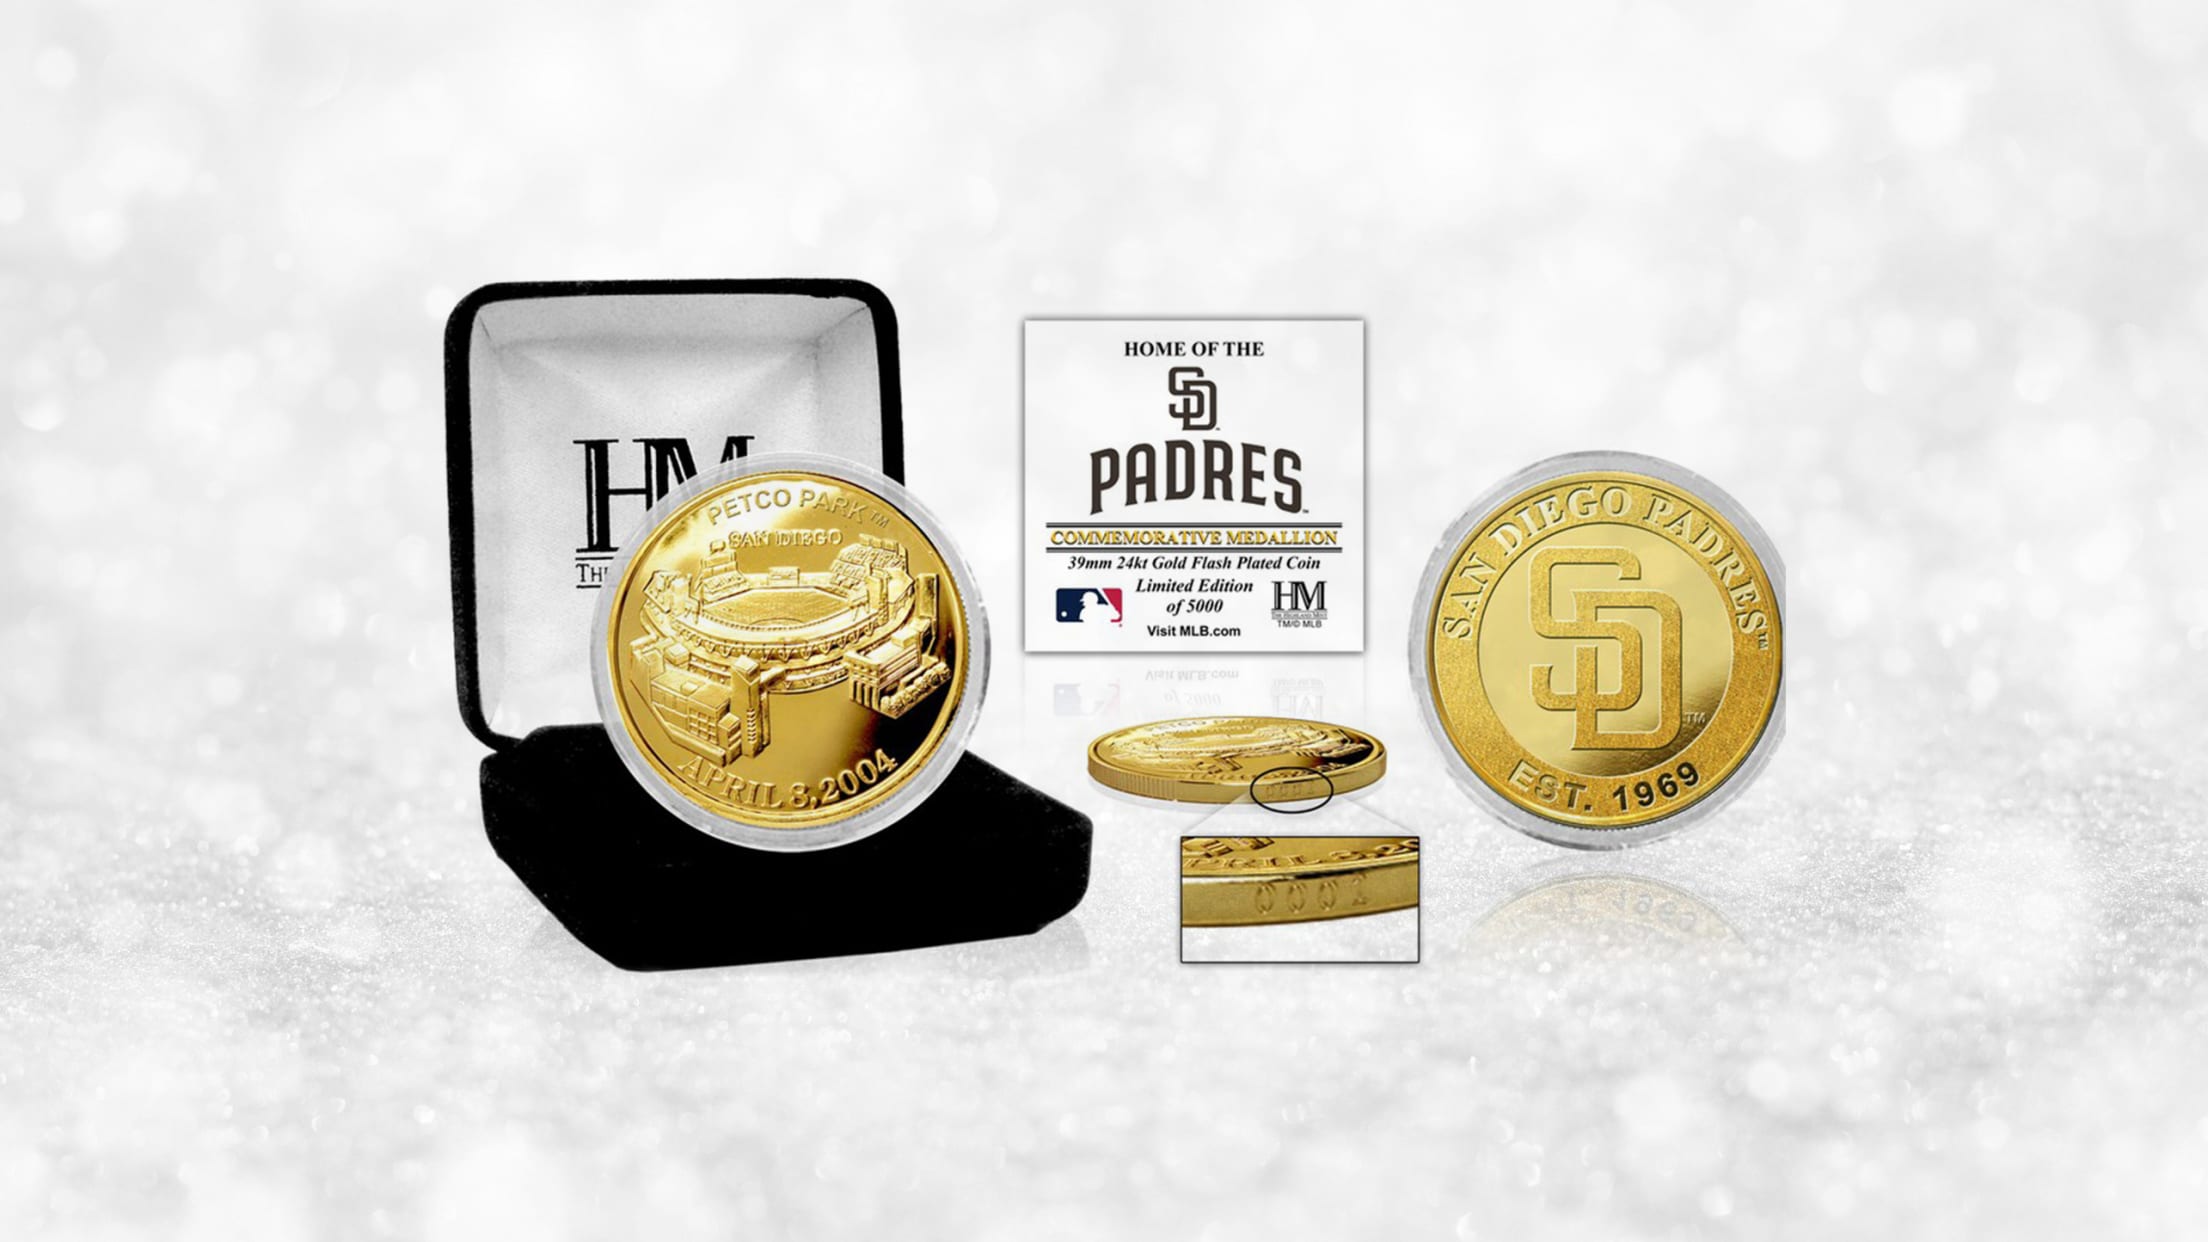 Looking for the perfect gift for your - San Diego Padres